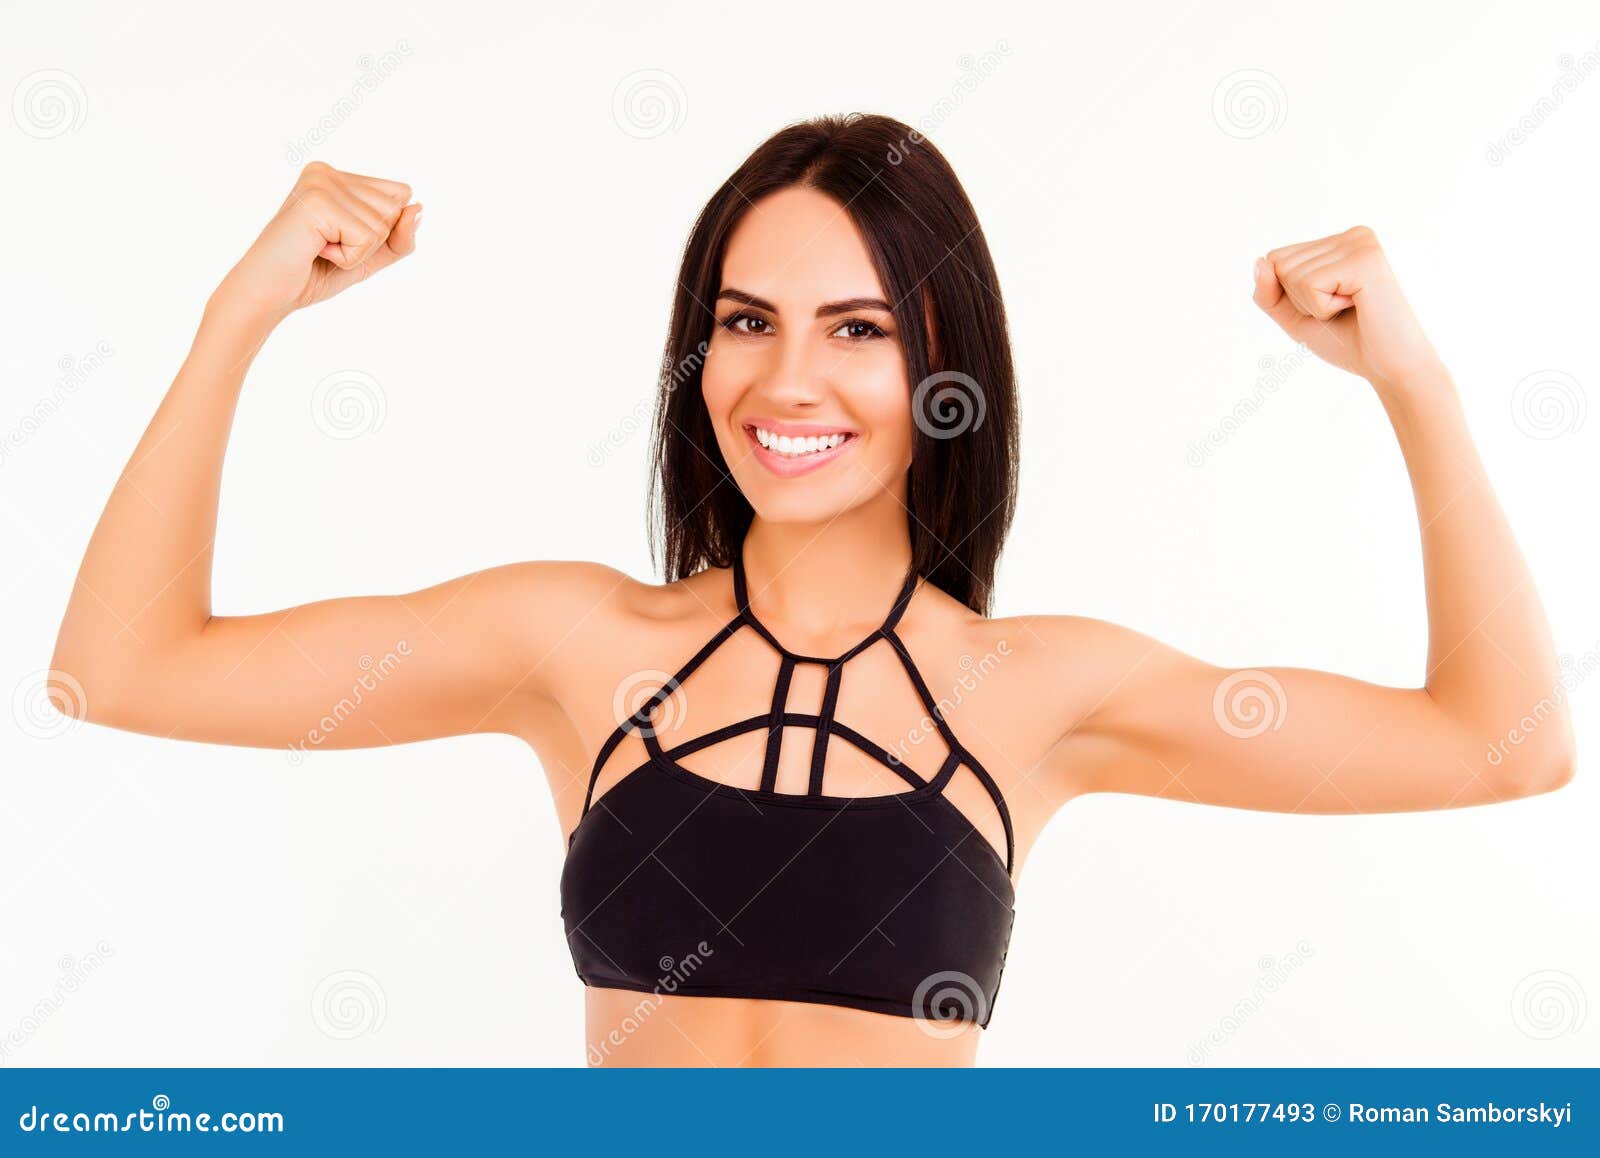 Healthy Fit Young Woman Demonstrating Her Strong Arms Stock Image - Image  of shape, beautiful: 170177493